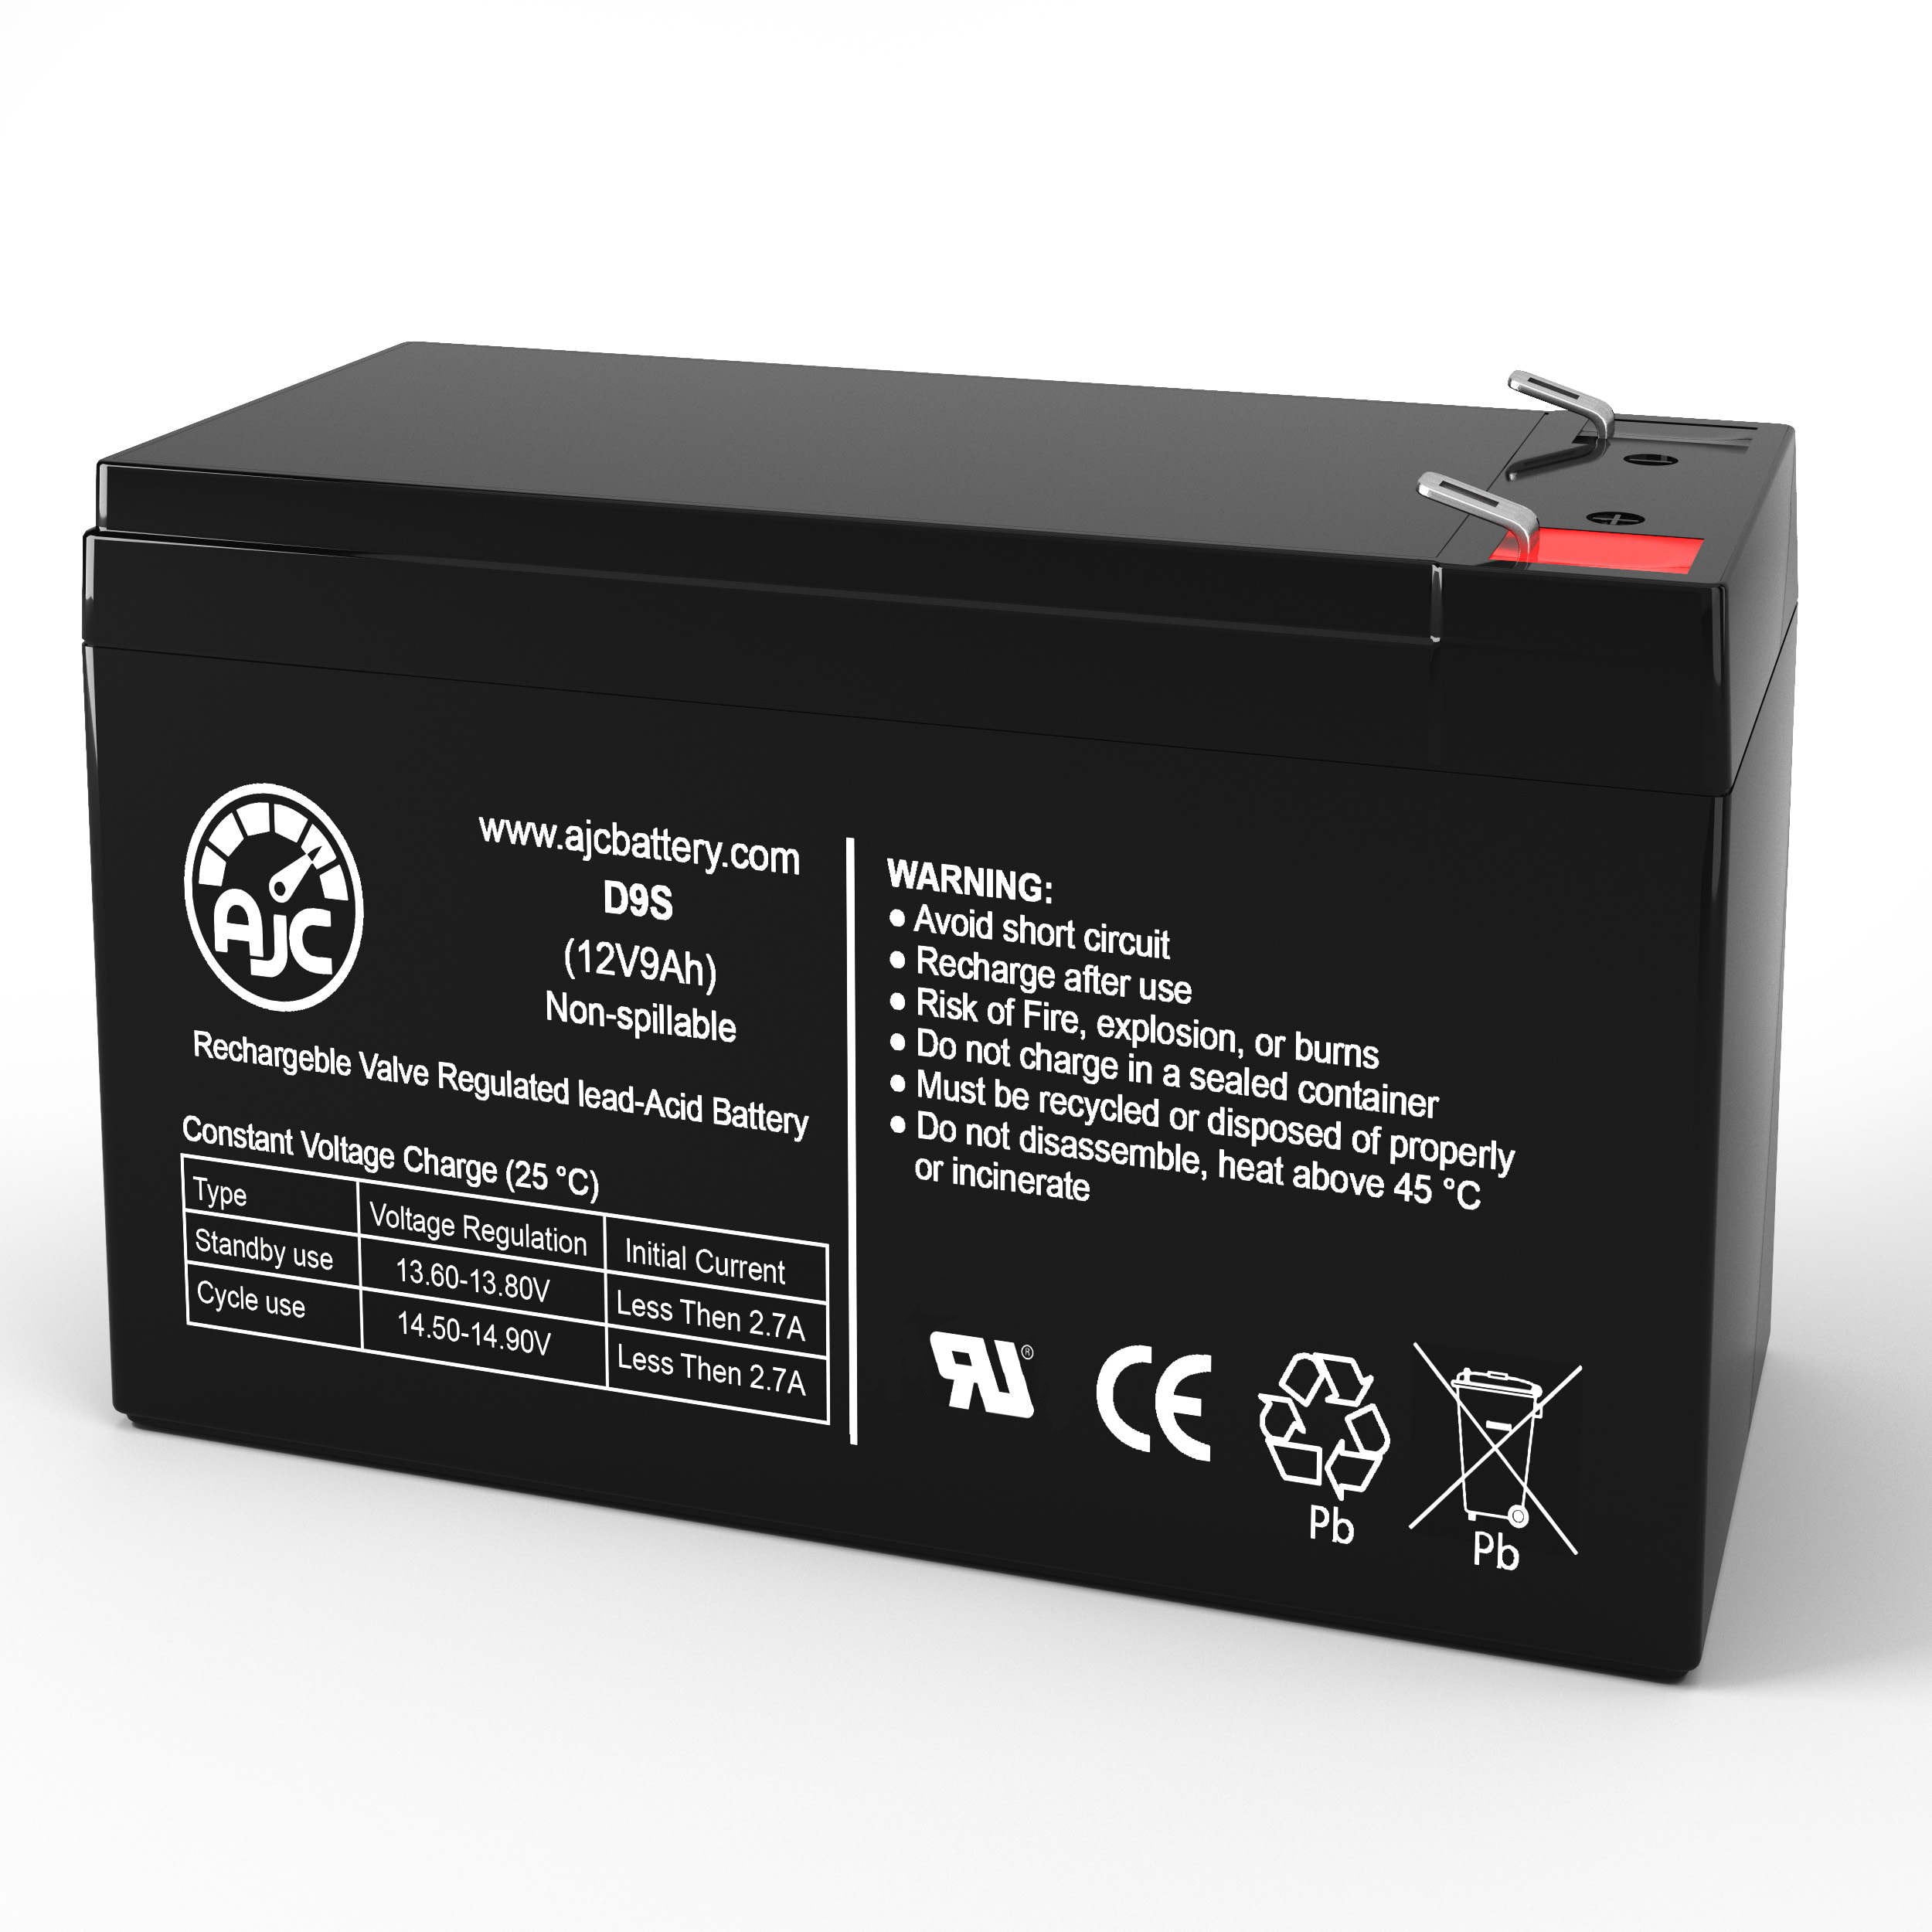 RBC5 RBC9 RBC22 RBC32 RBC48 RBC33 APC SmartUPS 700 UPS Battery Pack for 